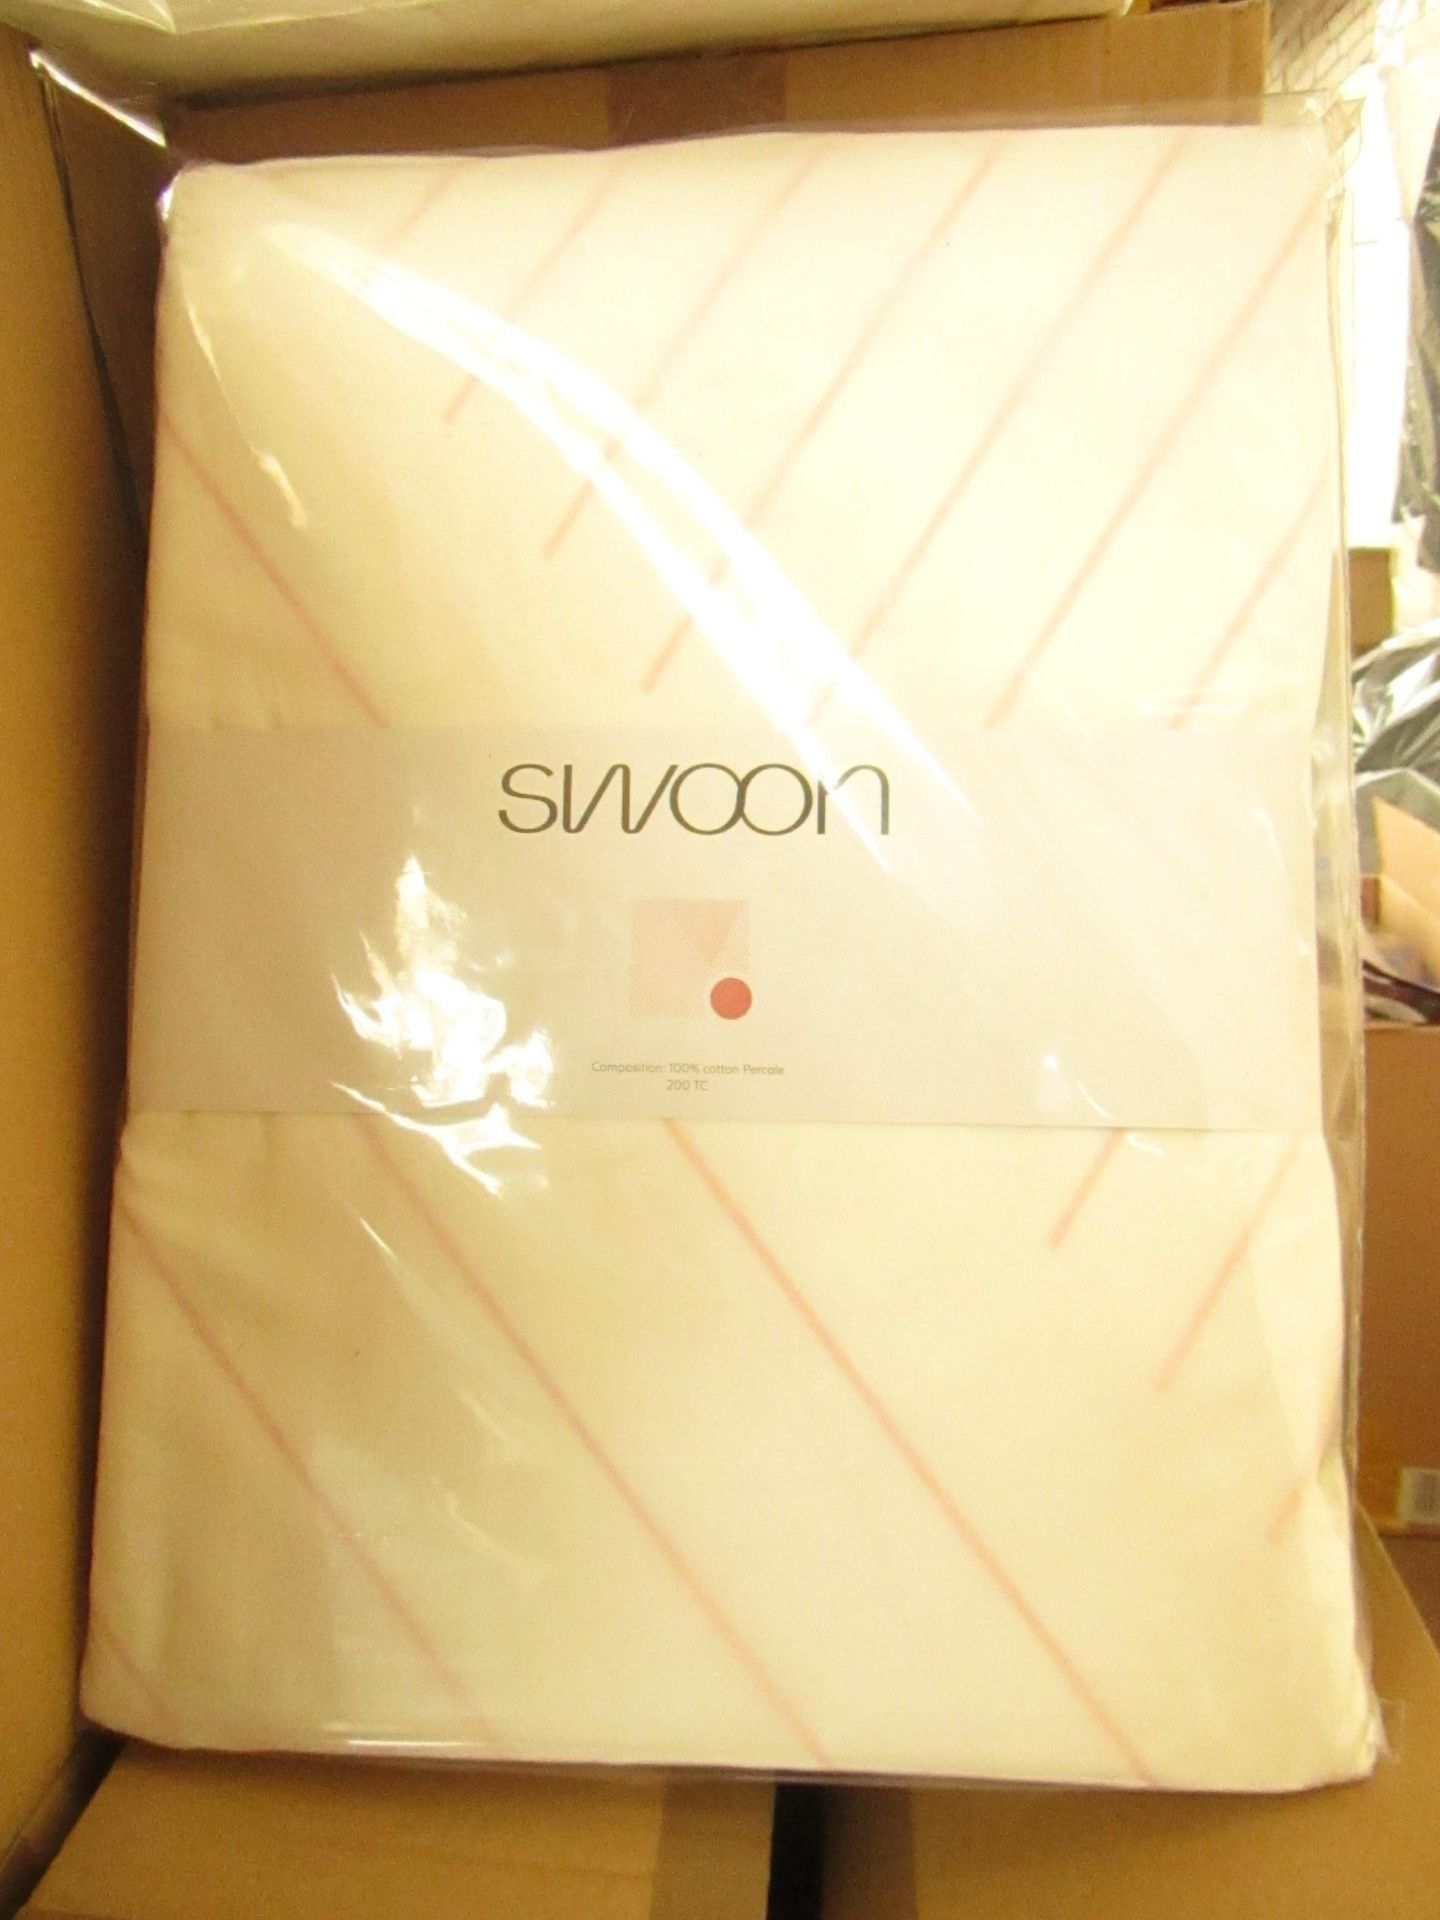 |1x SWOON BOOLE PINK KING SIZE DUVET SET THAT INCLUDE DUVET COVER AND 2 MATCHING PILLOW CASES | - Image 2 of 2